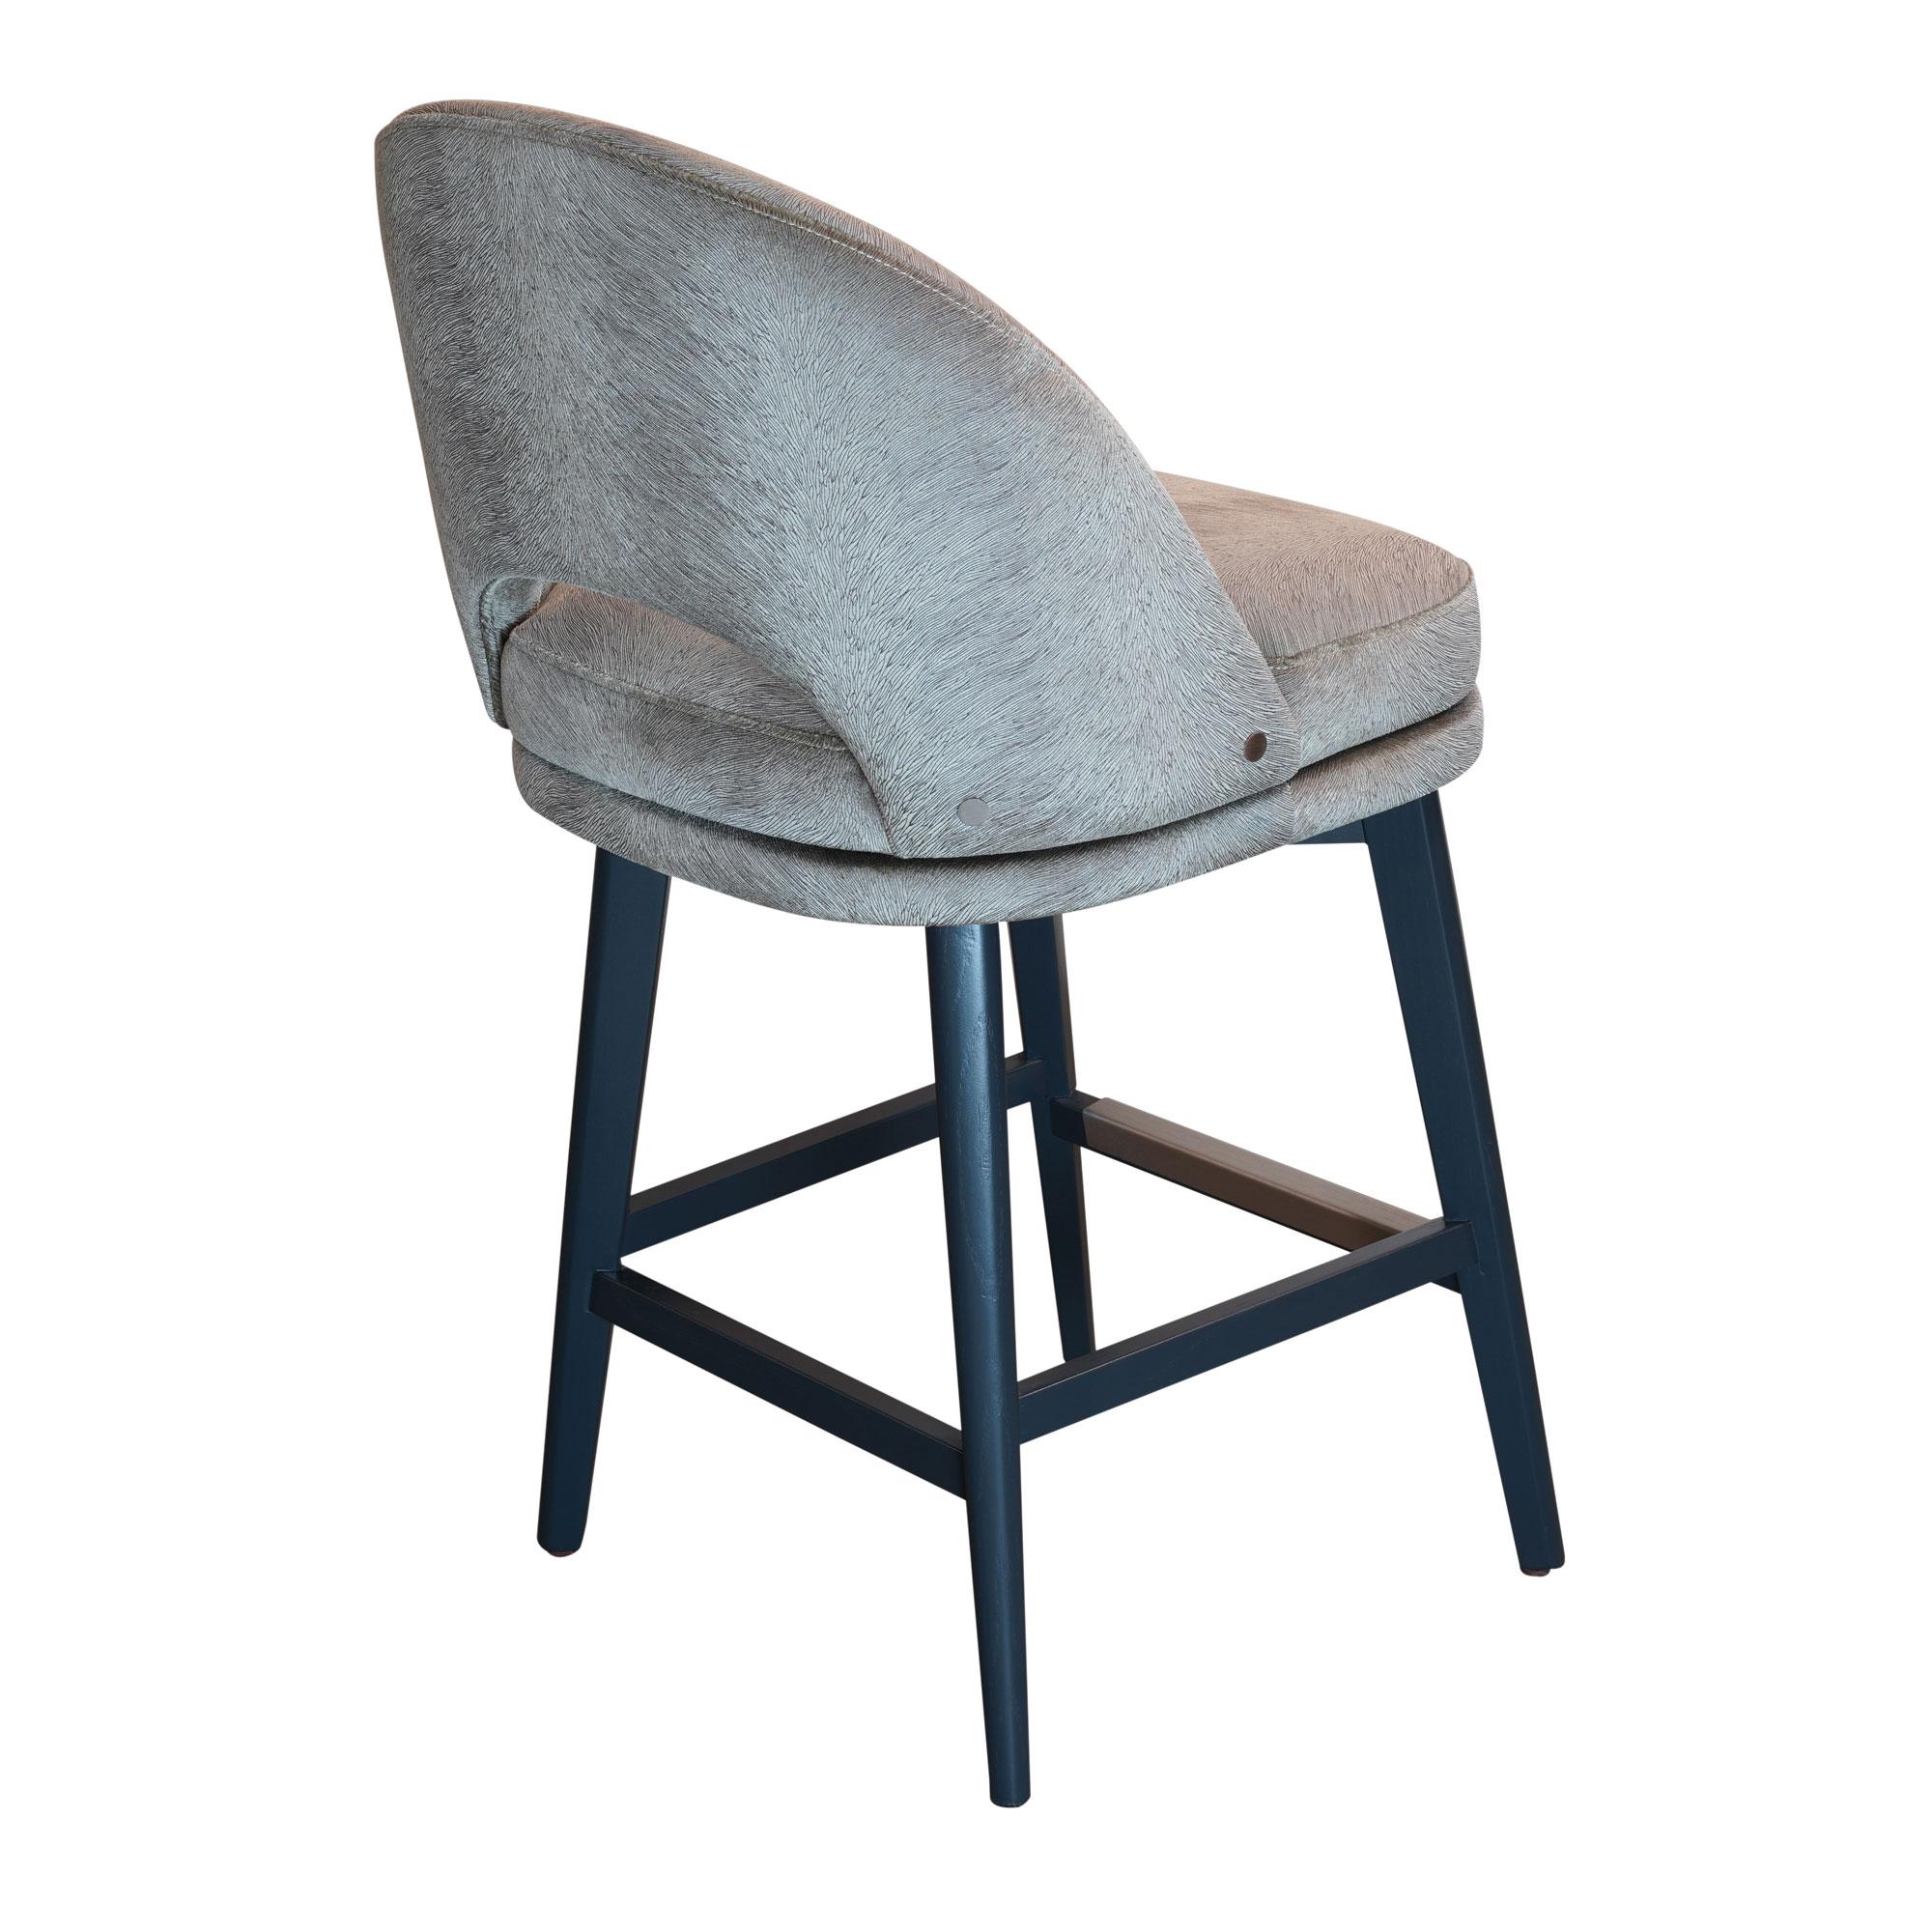 Plated Greta Swivel Bar or Counter Stool For Sale